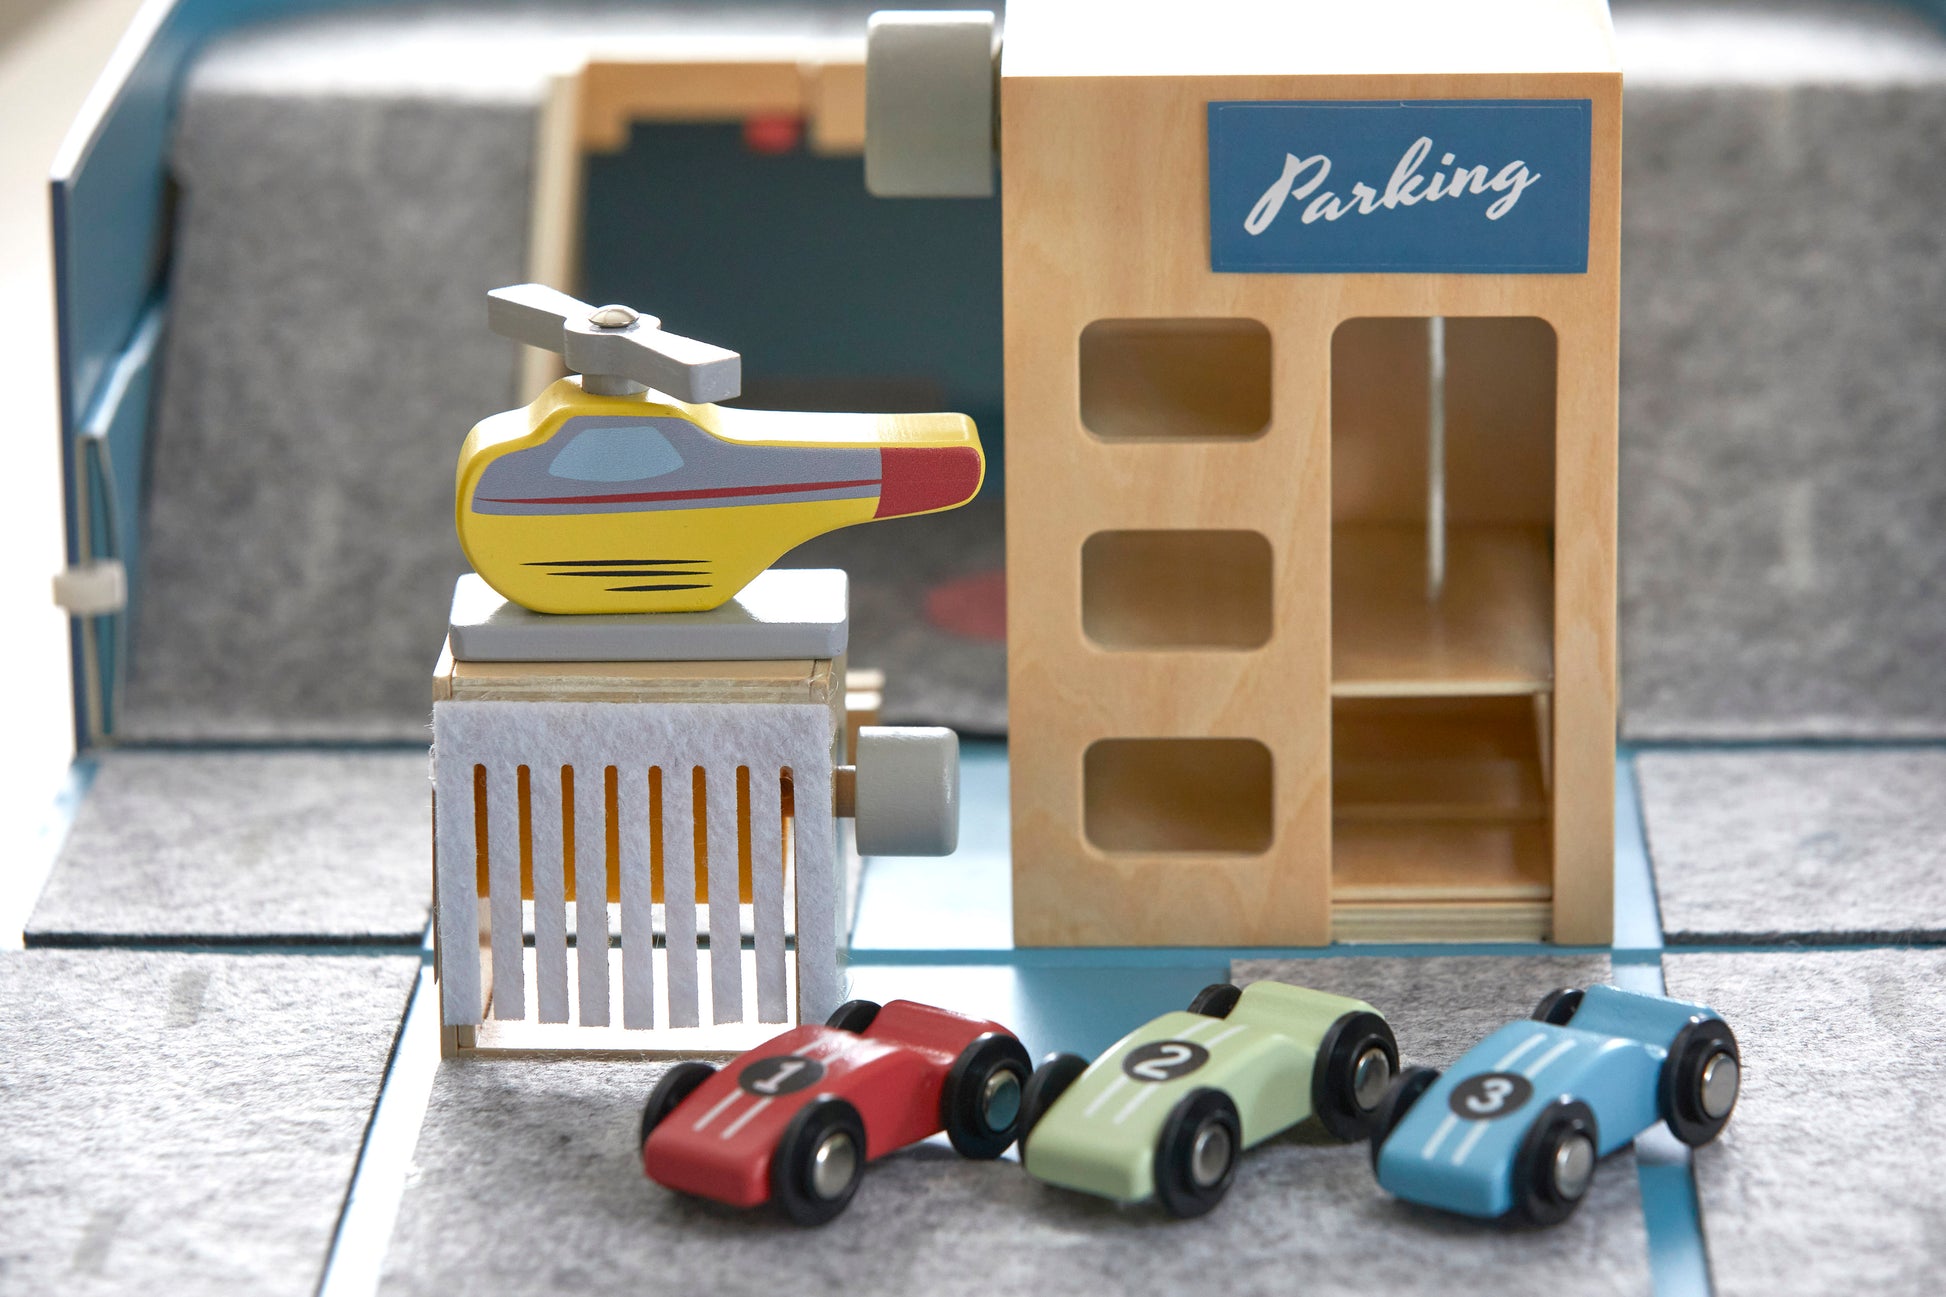 Car Suitcase. Includes parking garage, car wash, 3 cars, one helicopter, stickers and name tag for customising. Size 345 x 240 x 100 mm, car size: 6.5 x 2 x 3 cm (compatible with Matchbox cars). Materials: sustainable & recycled materials (FSC timber, recycled felt, cardboard). Original, educational , ethically produced. Supporting cognitive, fine motor, problem solving skills & imaginative play. Easy to pack and carry around. Suitable for children age 3+ years.  Designed and prototyped in Australia. 